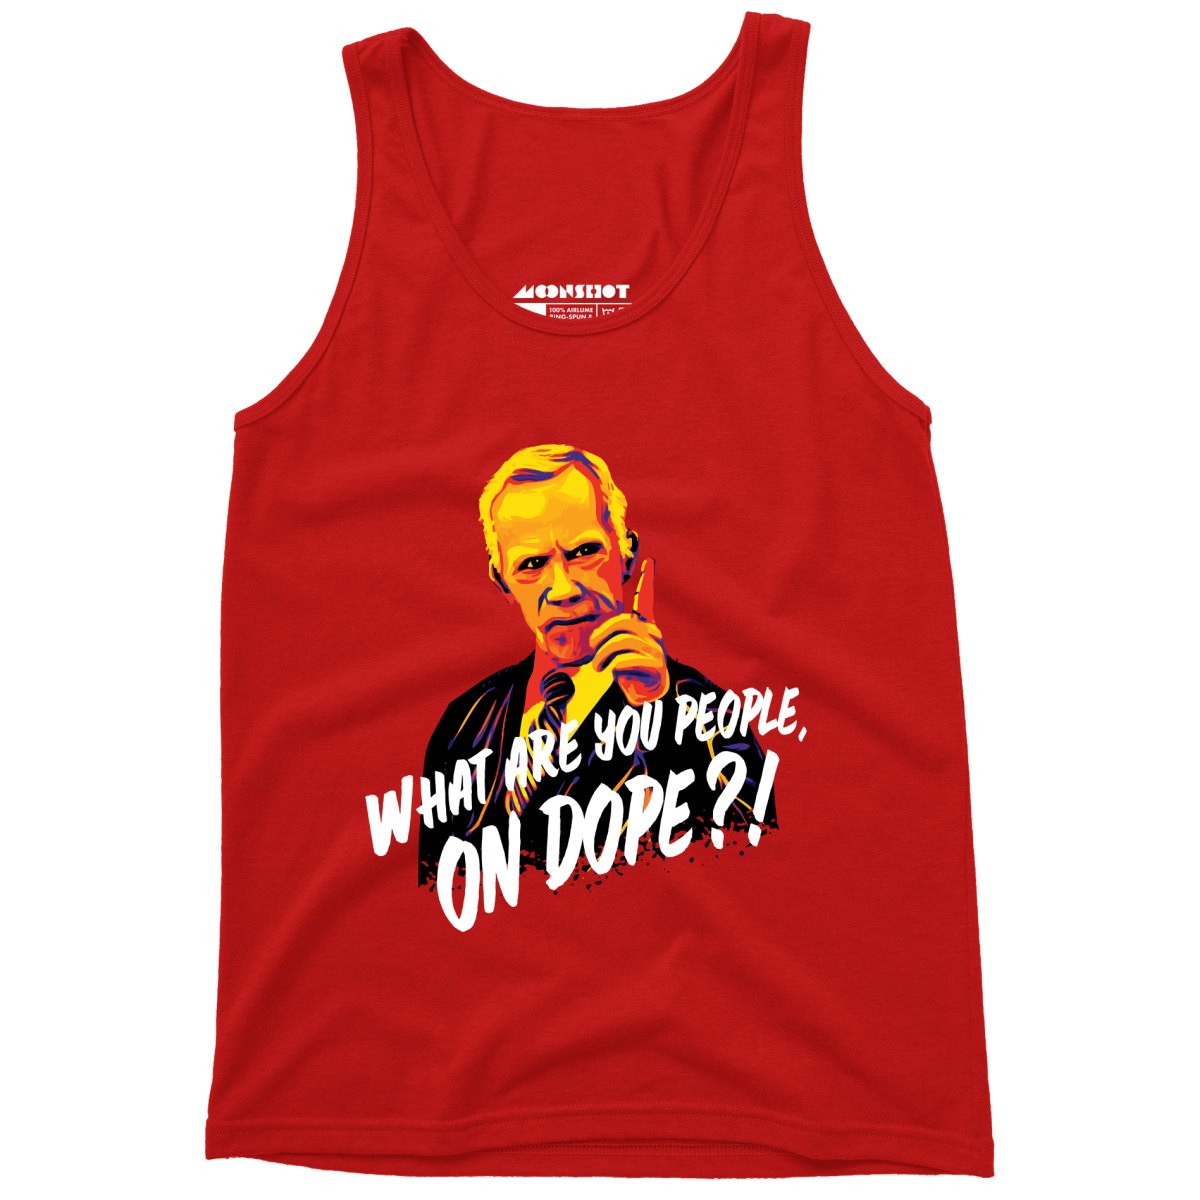 Mr. Hand - What Are You People, On Dope? - Unisex Tank Top